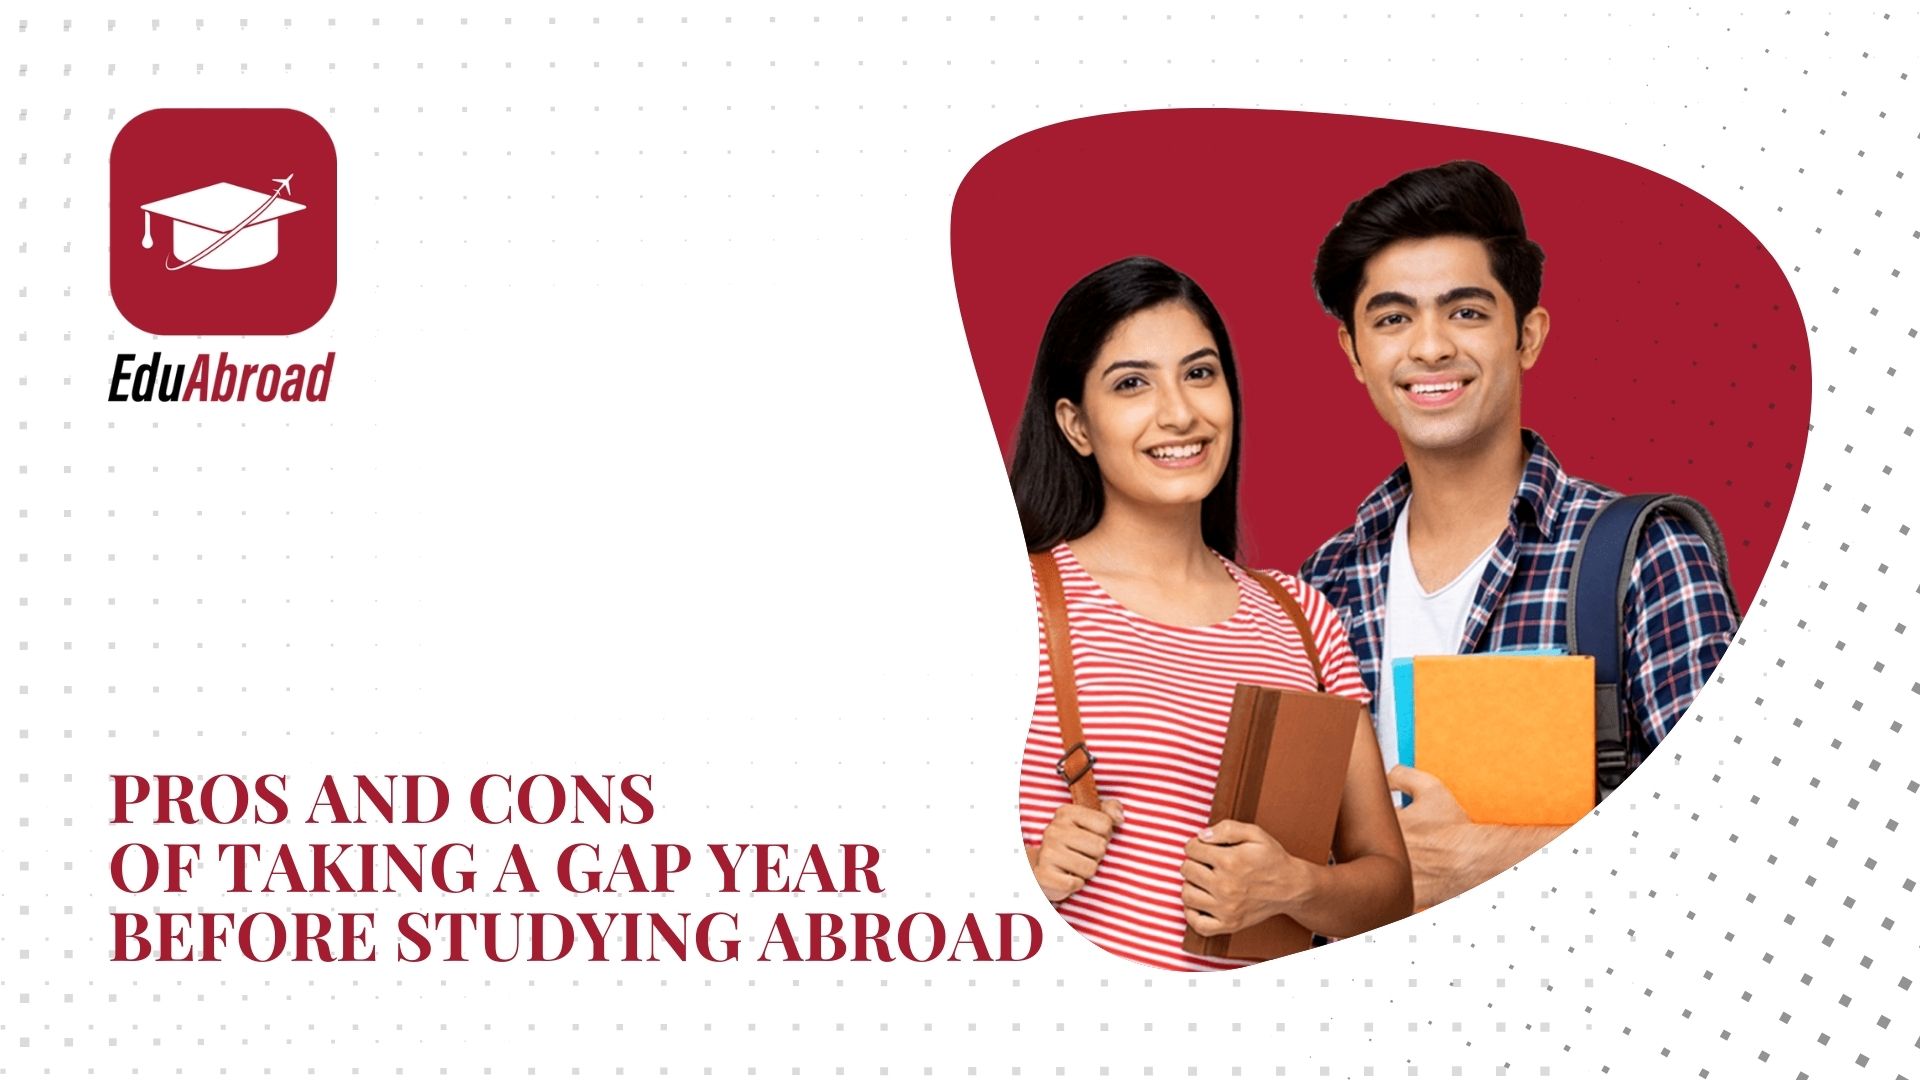 PROS AND CONS OF TAKING A GAP YEAR BEFORE STUDYING ABROAD